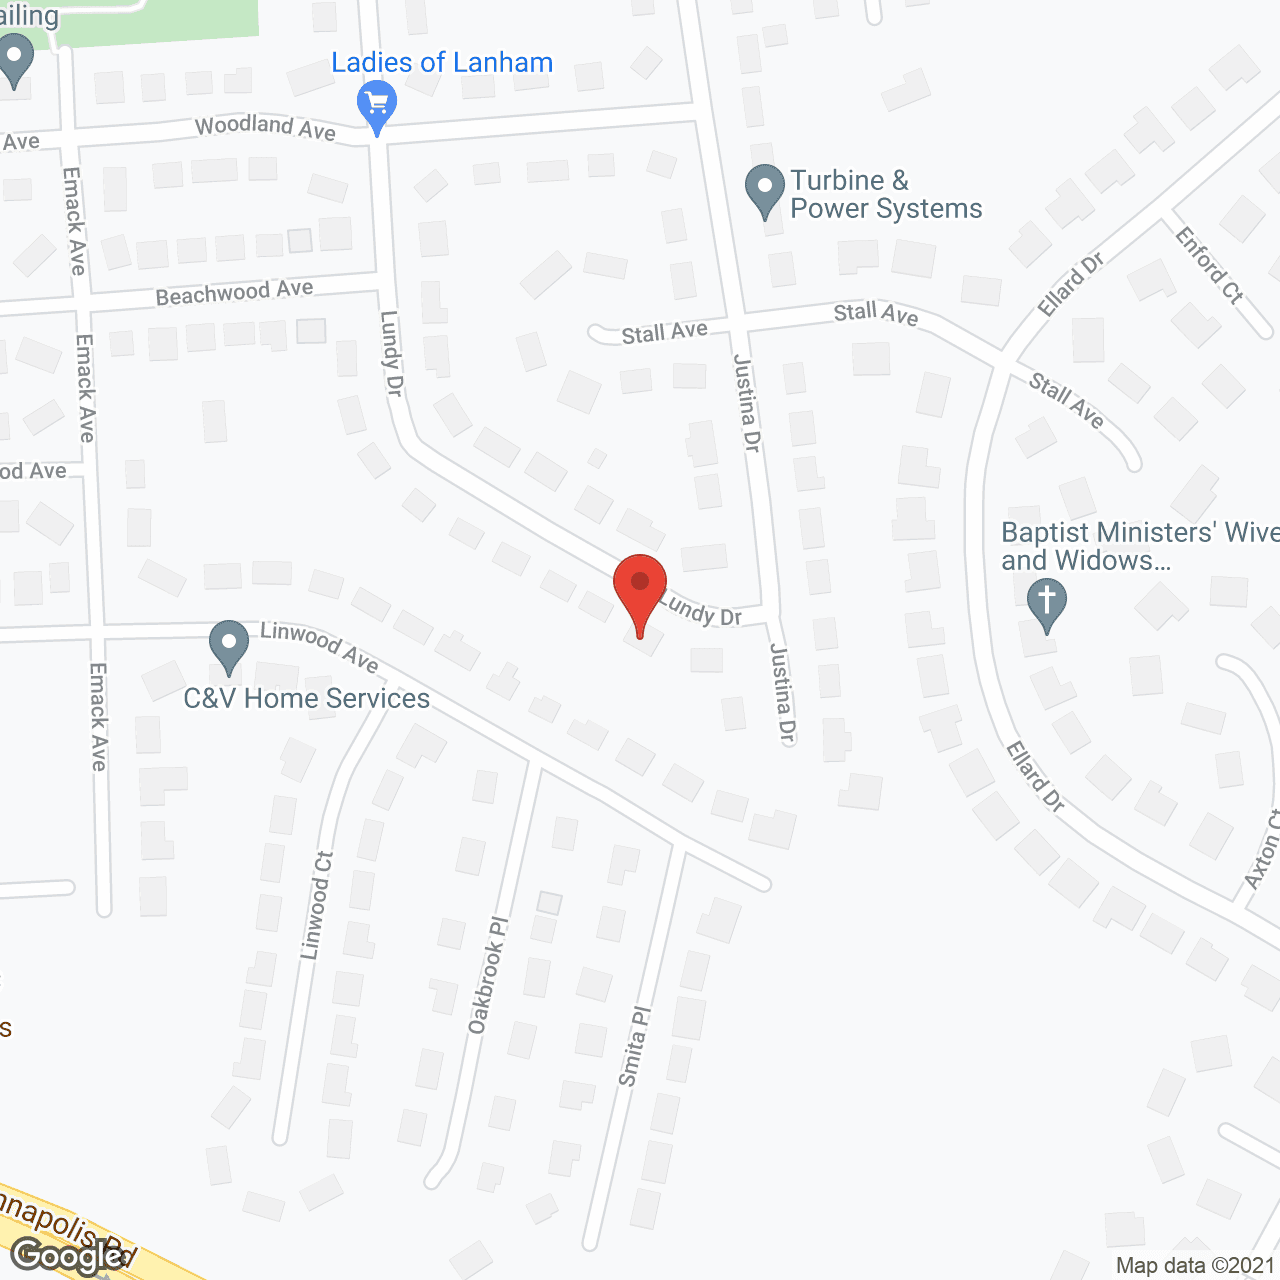 Renewed Life Assisted Living in google map